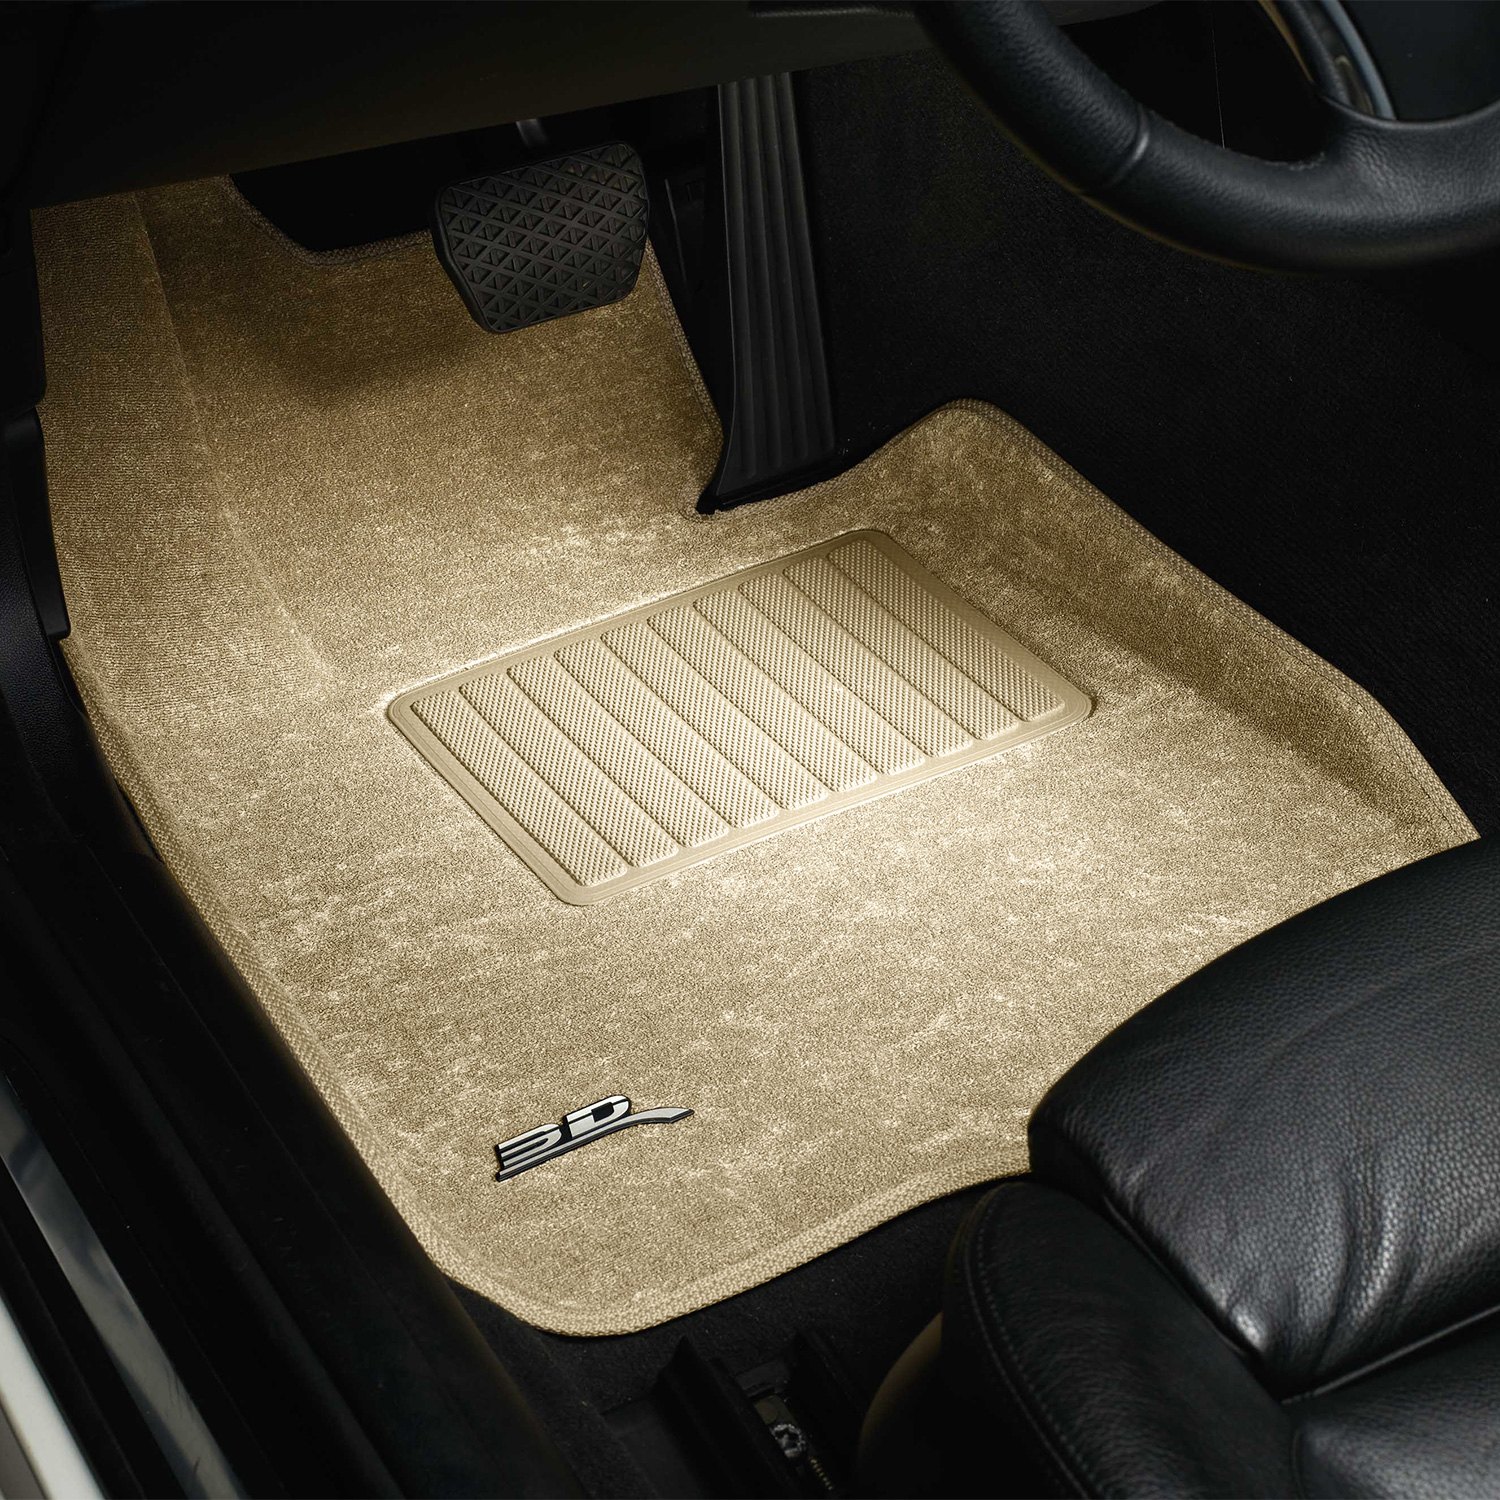 Classic Carpet Black 3D MAXpider Front Row Custom Fit Floor Mat for Select Ford Mustang Models